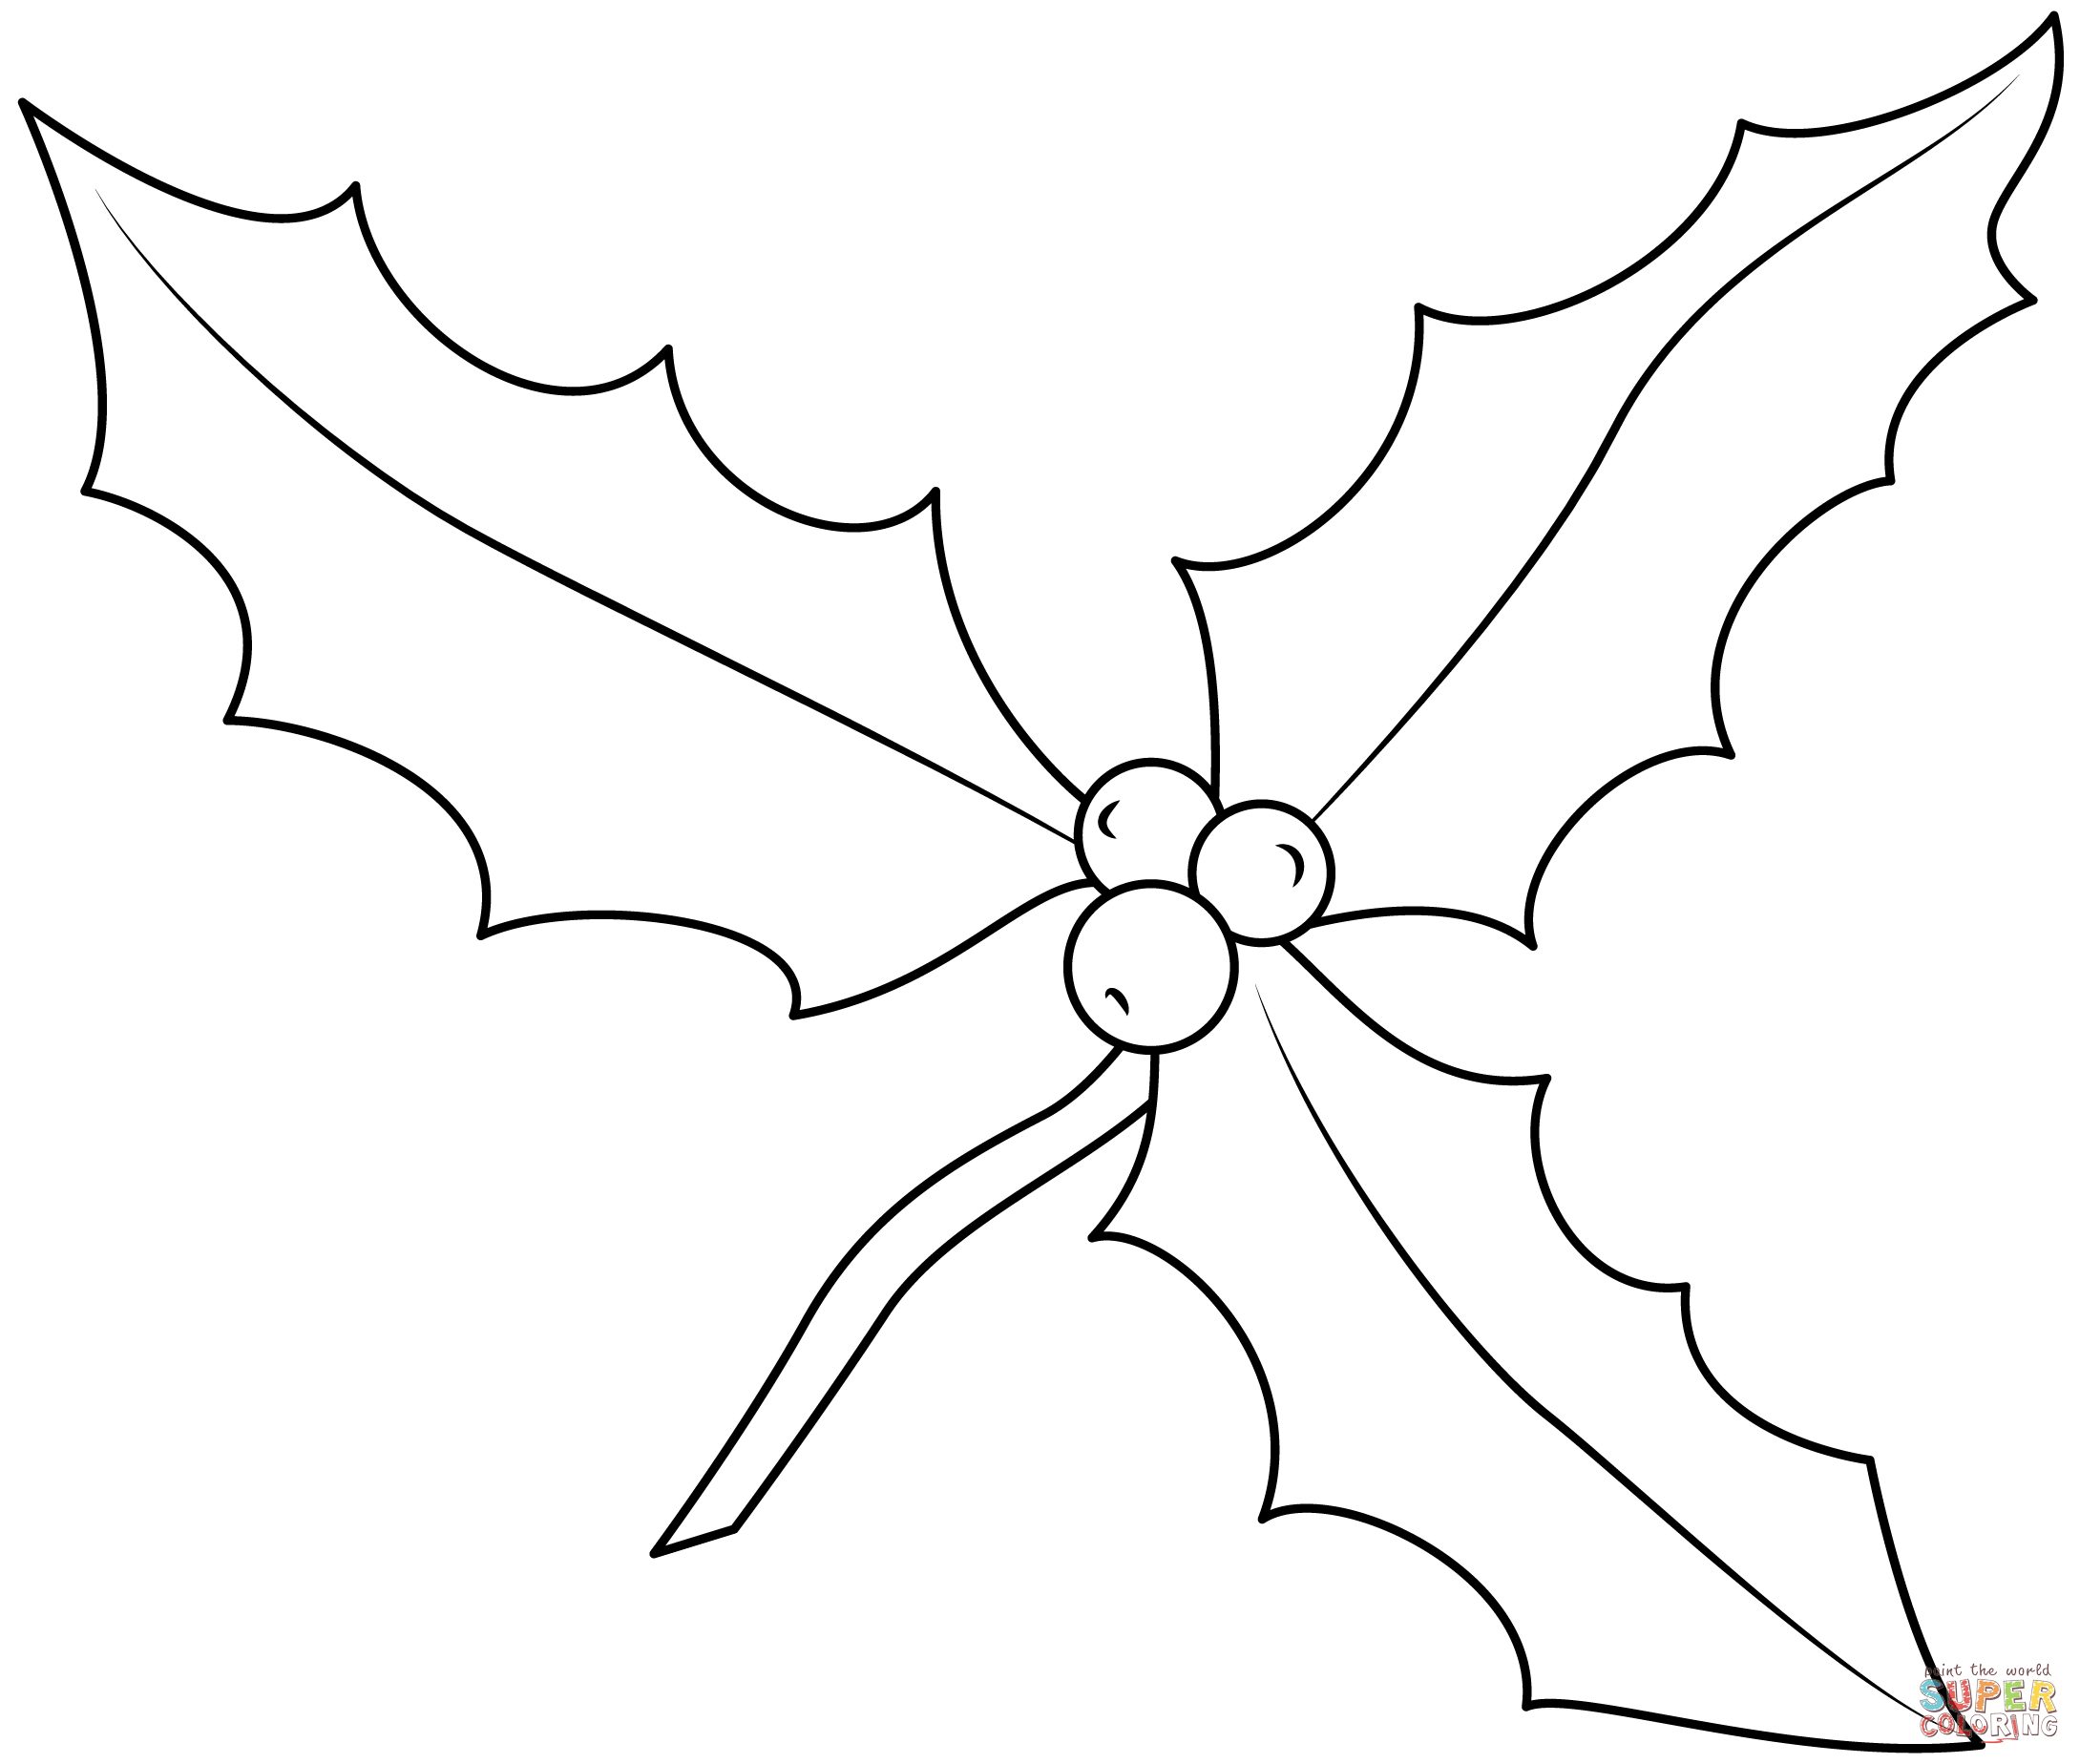 Holly Leaf coloring page